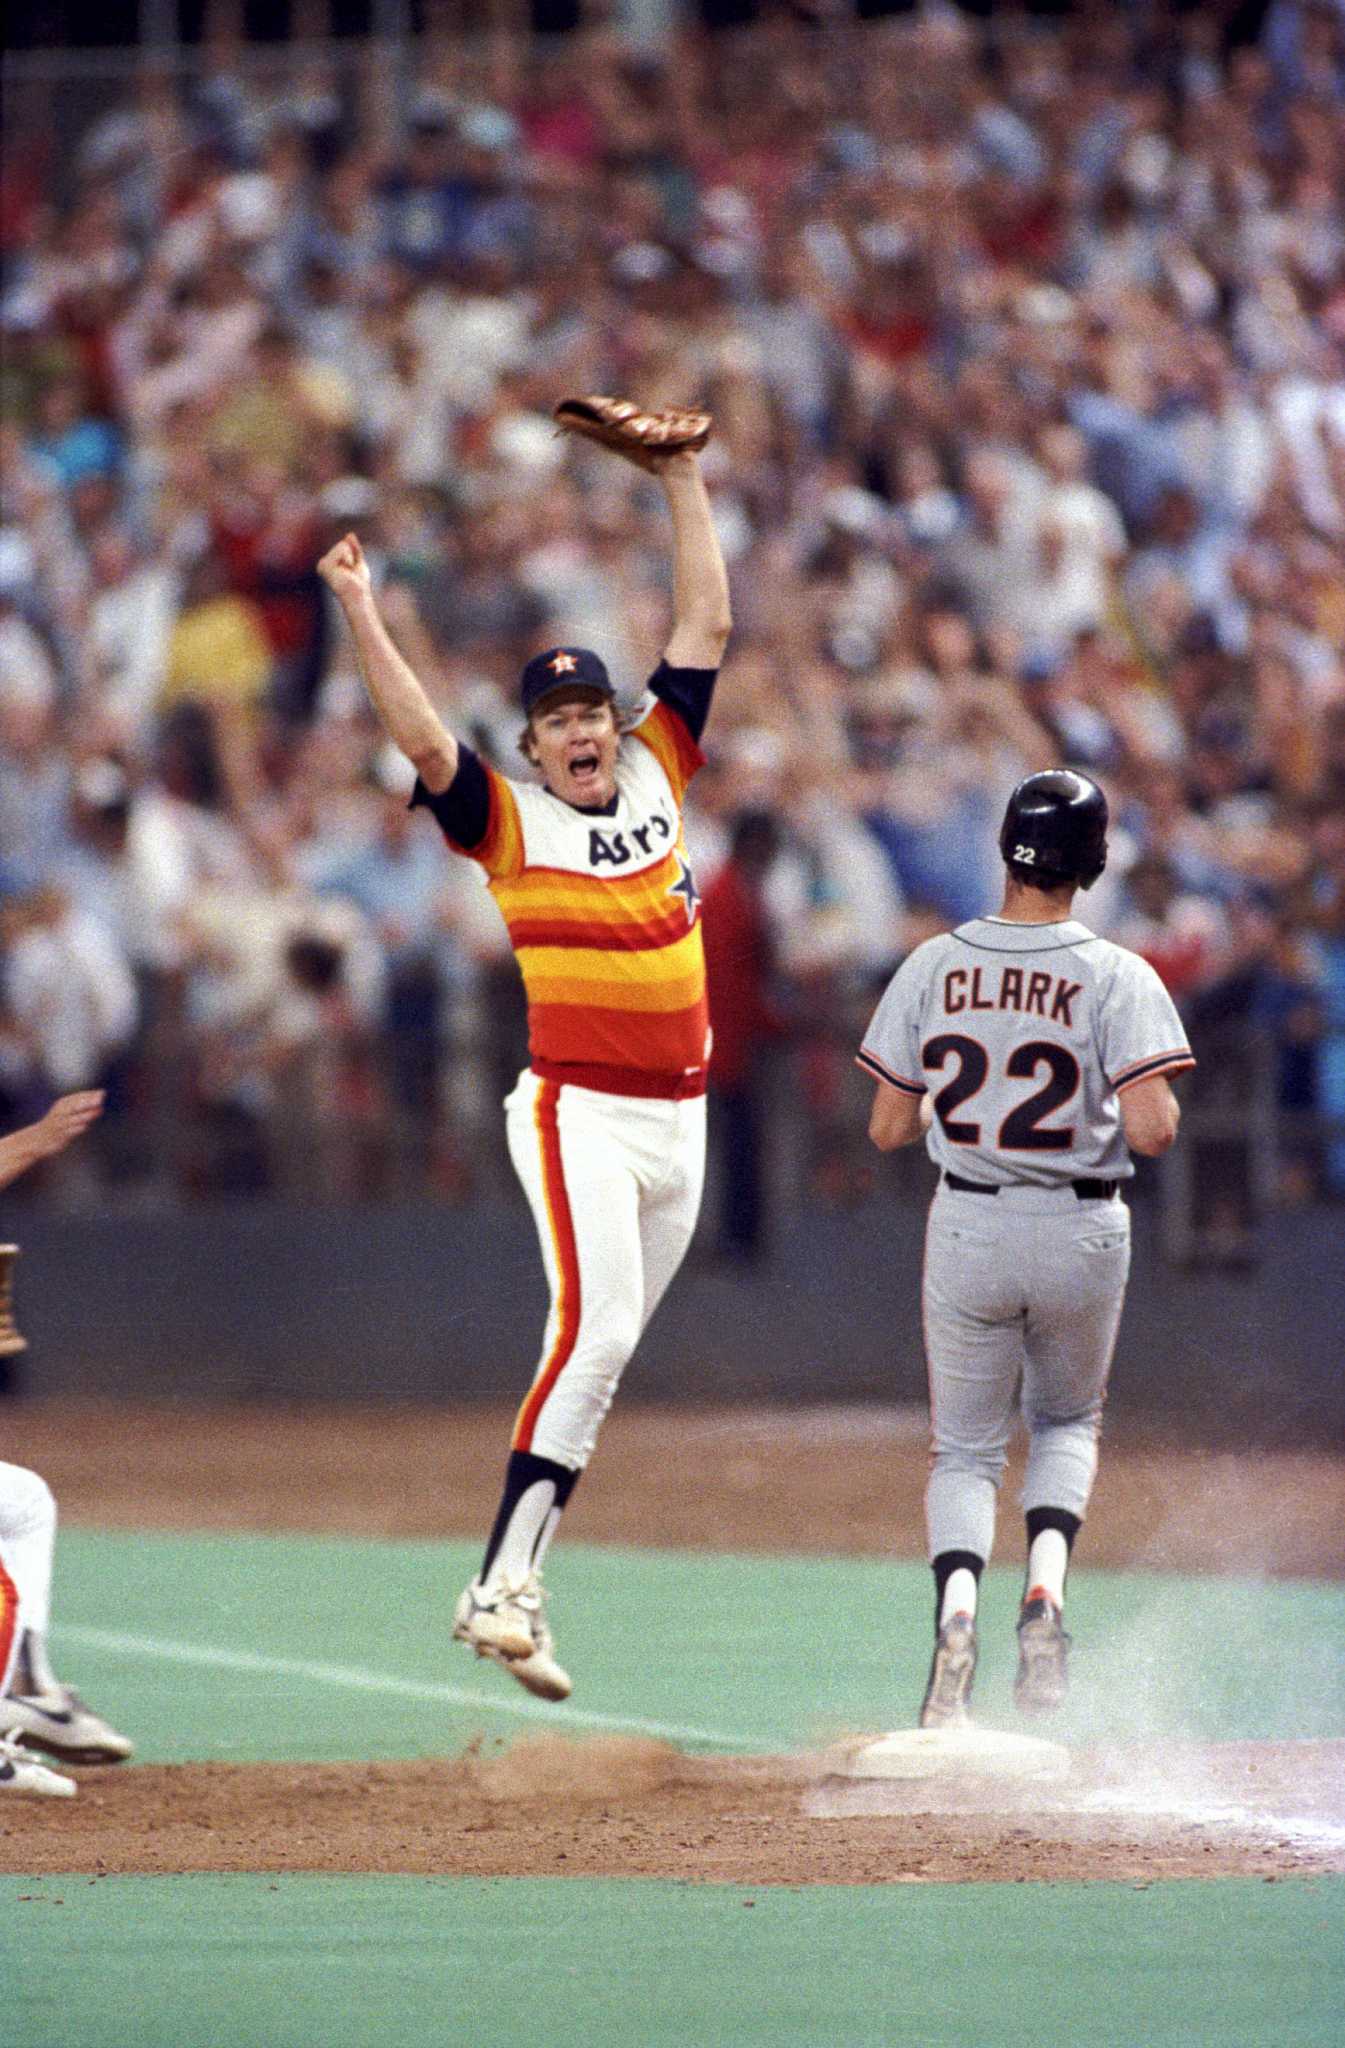 Remembering Astros' Mike Scott's clinching no-hitter 31 years ago today